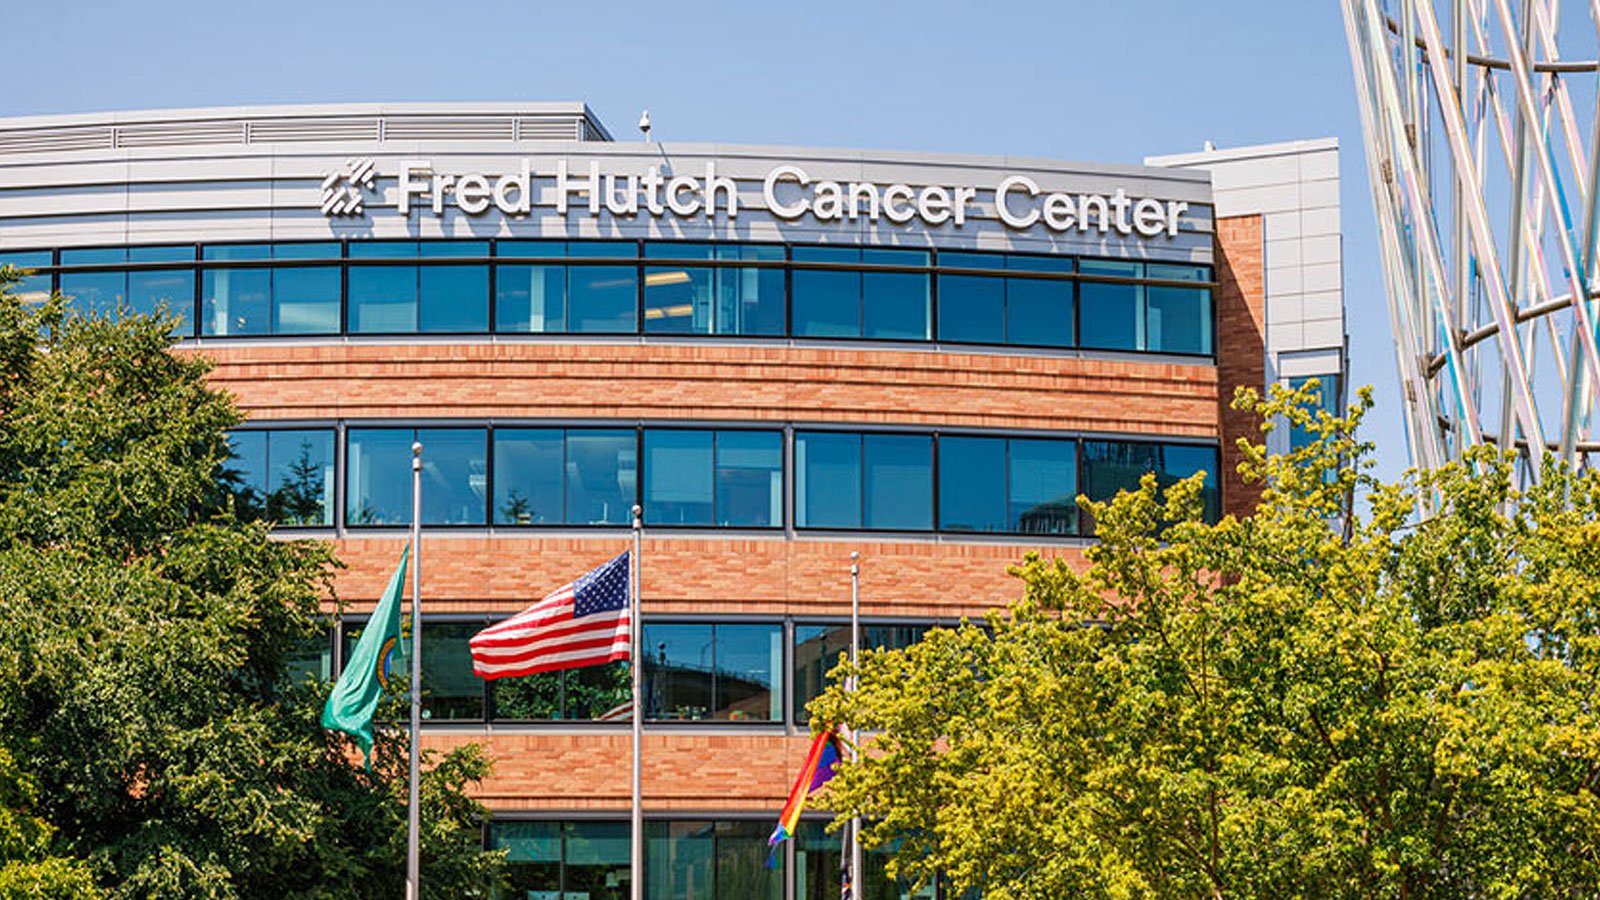 Ransomware gang behind threats to Fred Hutch cancer patients